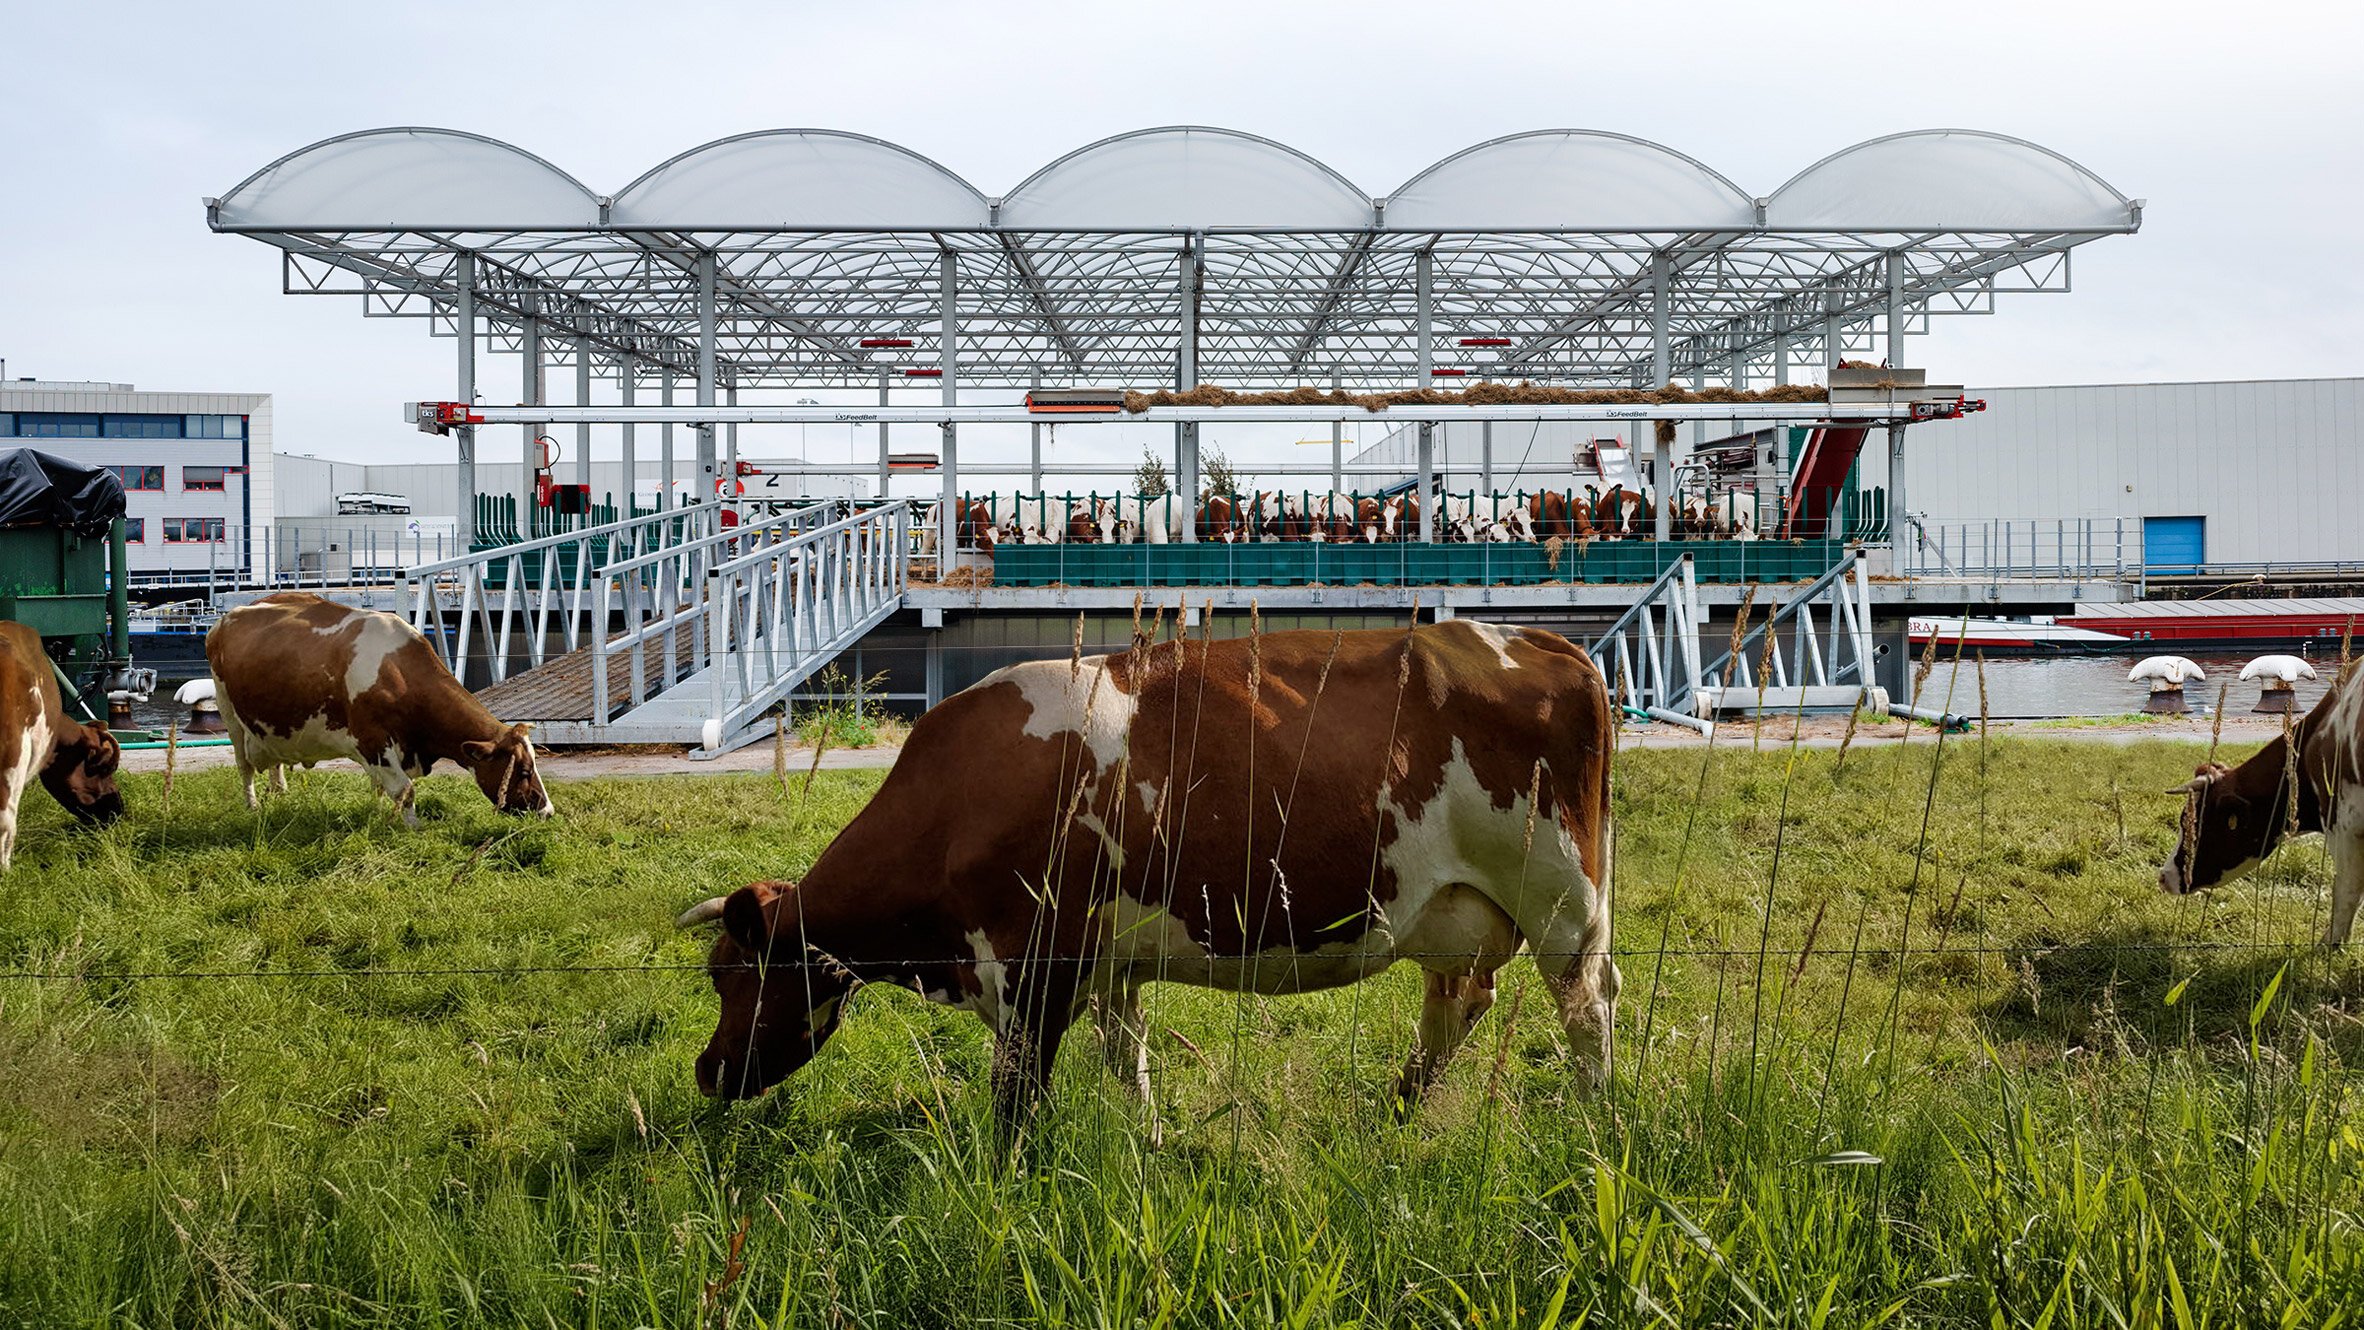 Image of Rotterdam’s Floating Dairy Farm, image sourced from Rubén Dario Kleimeer